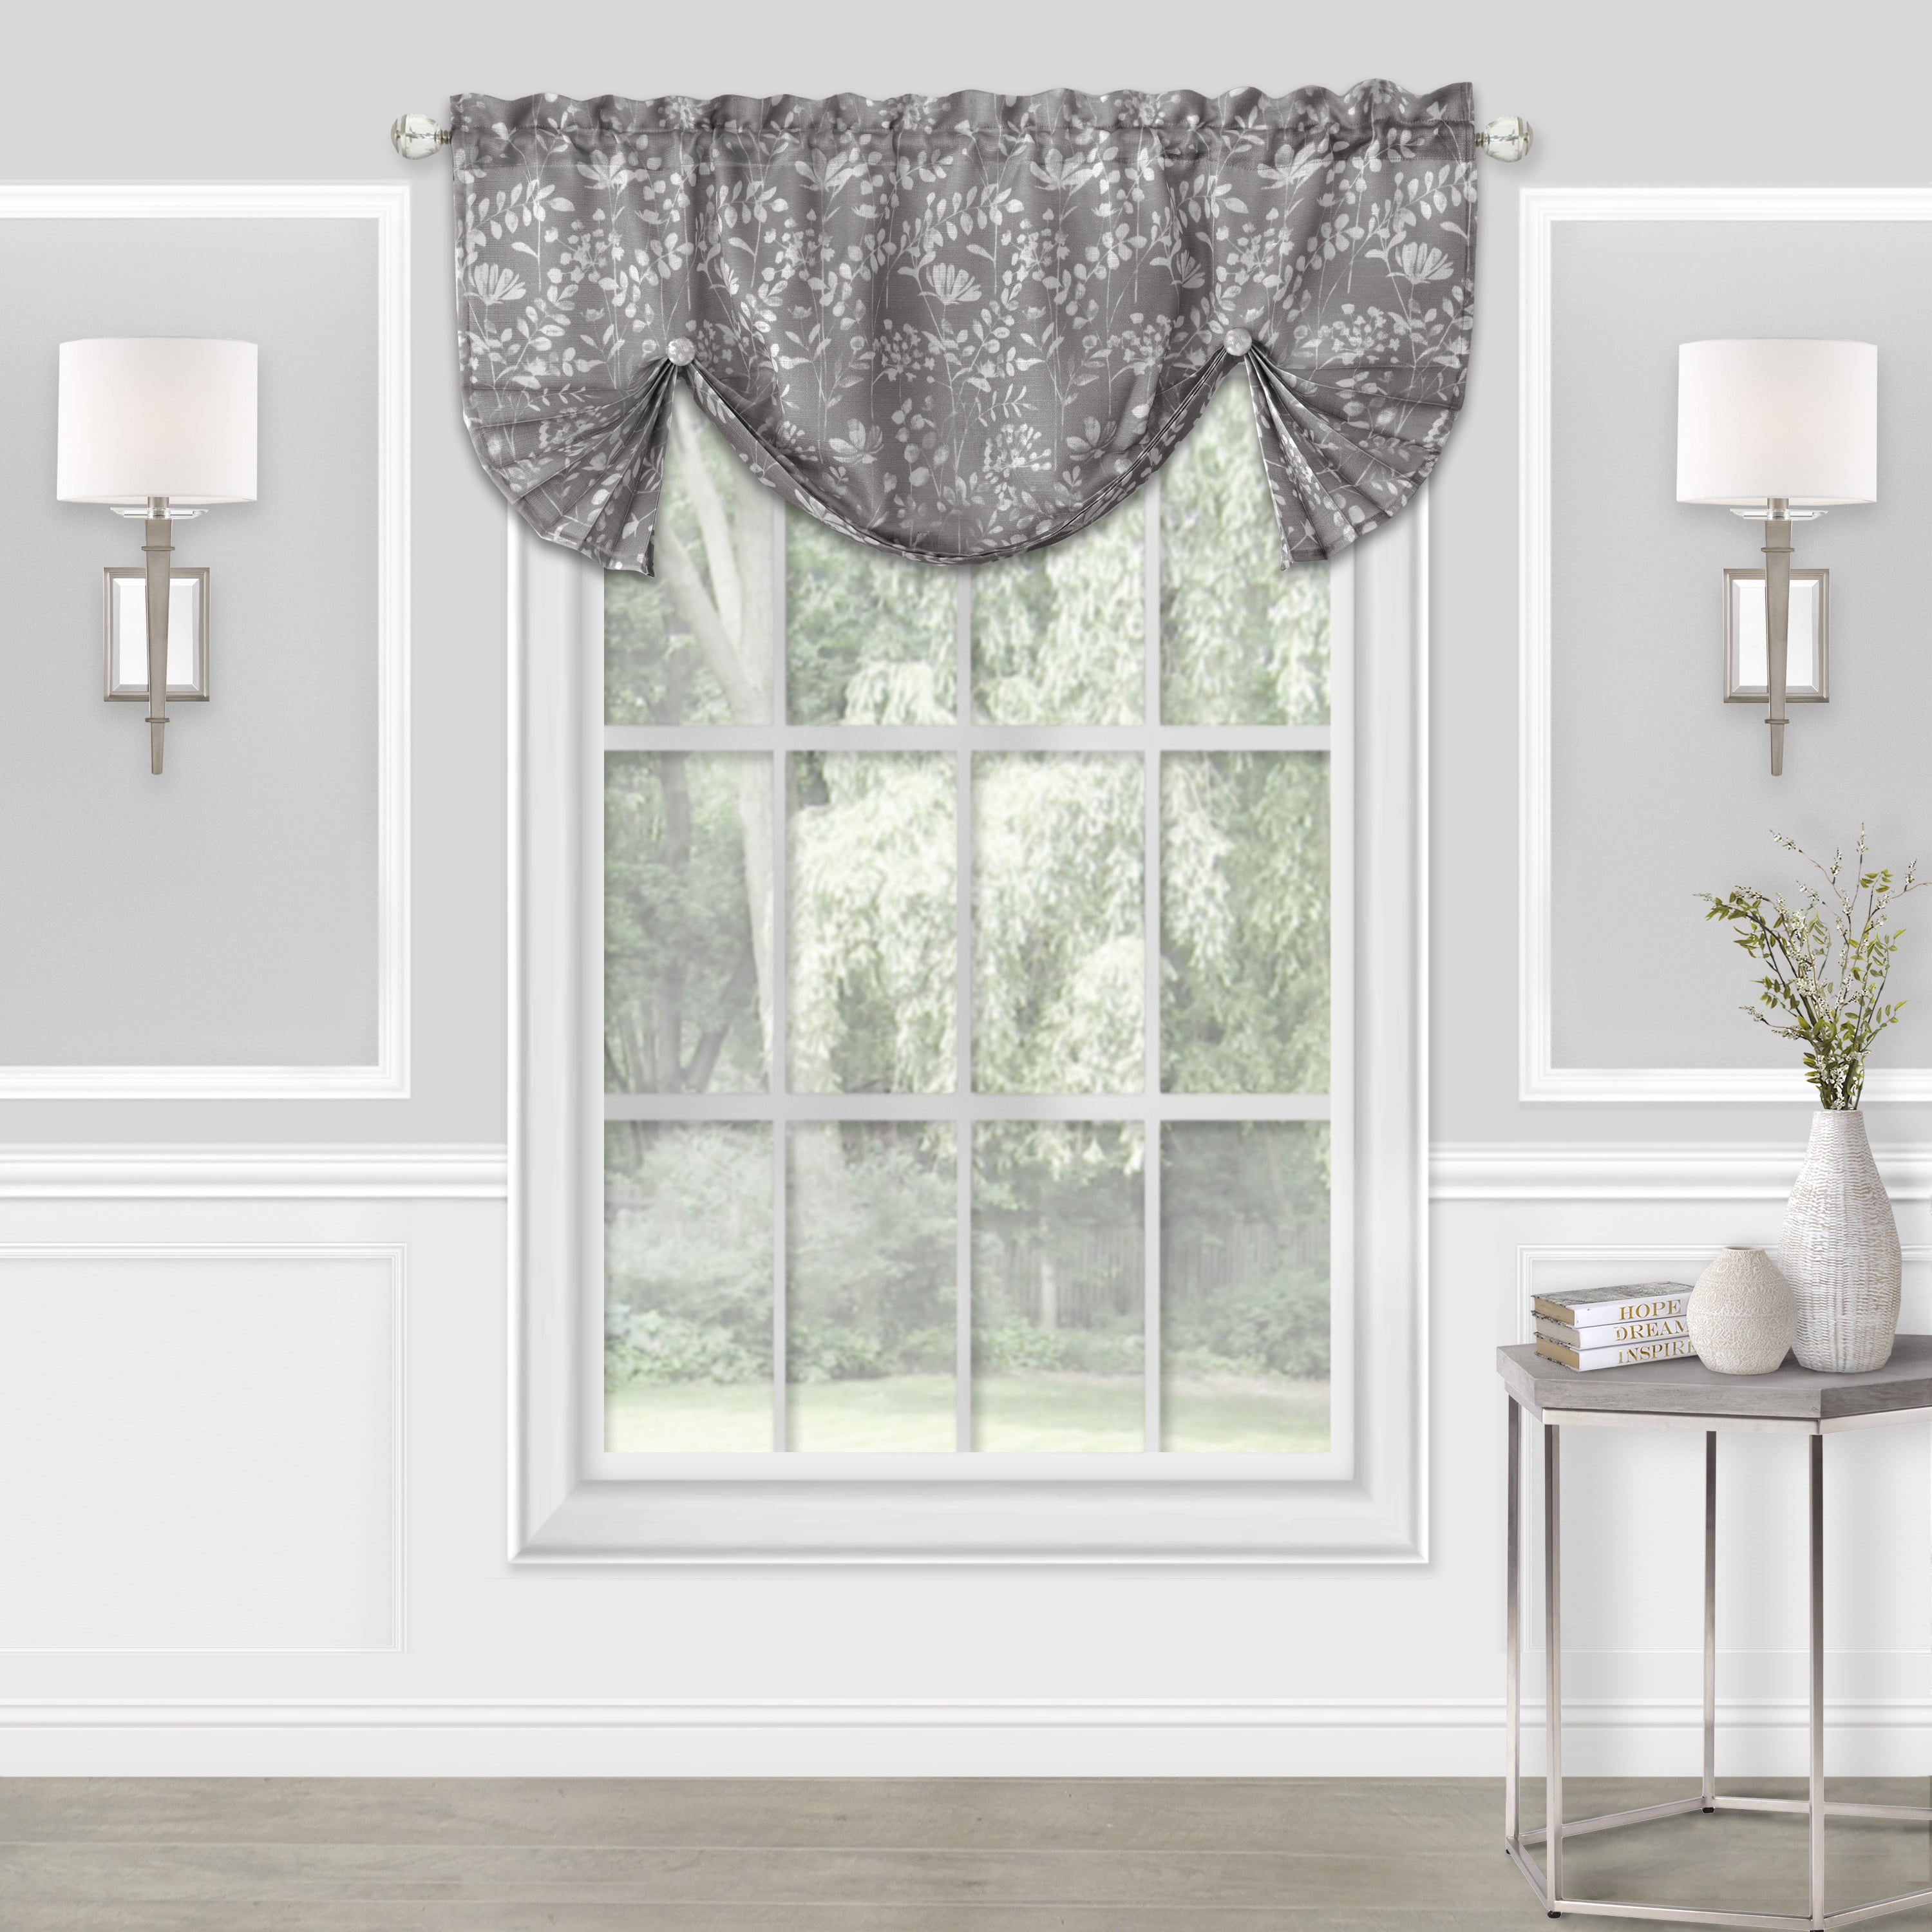 One Waverly Home Classics Medallion Mineral Valance 52" X 18" Fast Shipping 